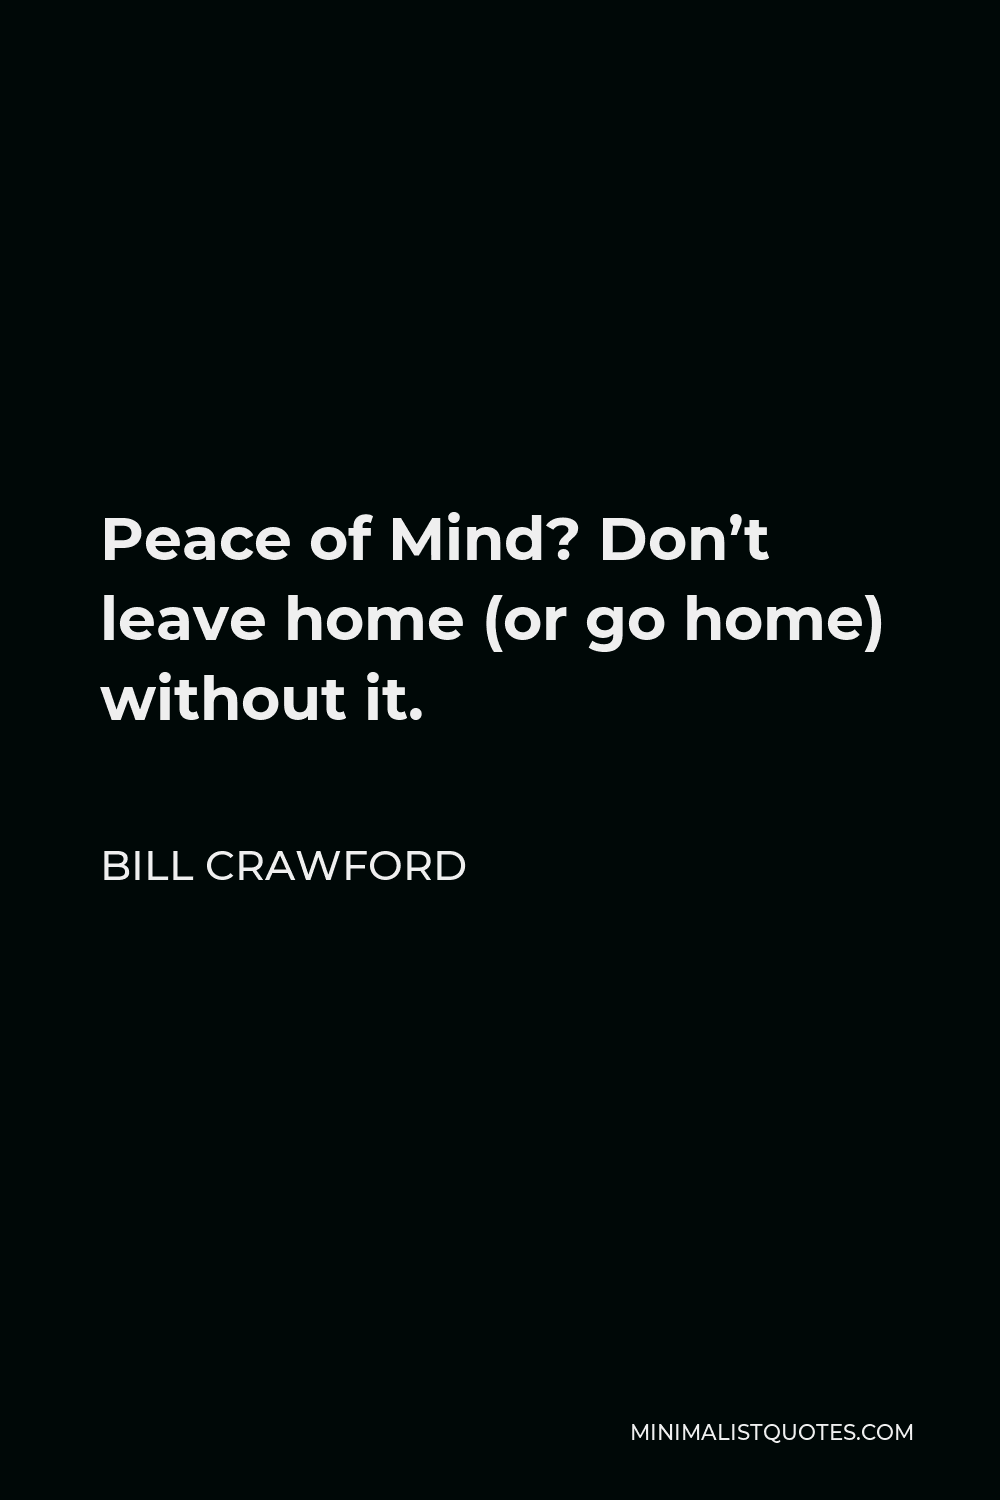 Bill Crawford Quote - Peace of Mind? Don’t leave home (or go home) without it.